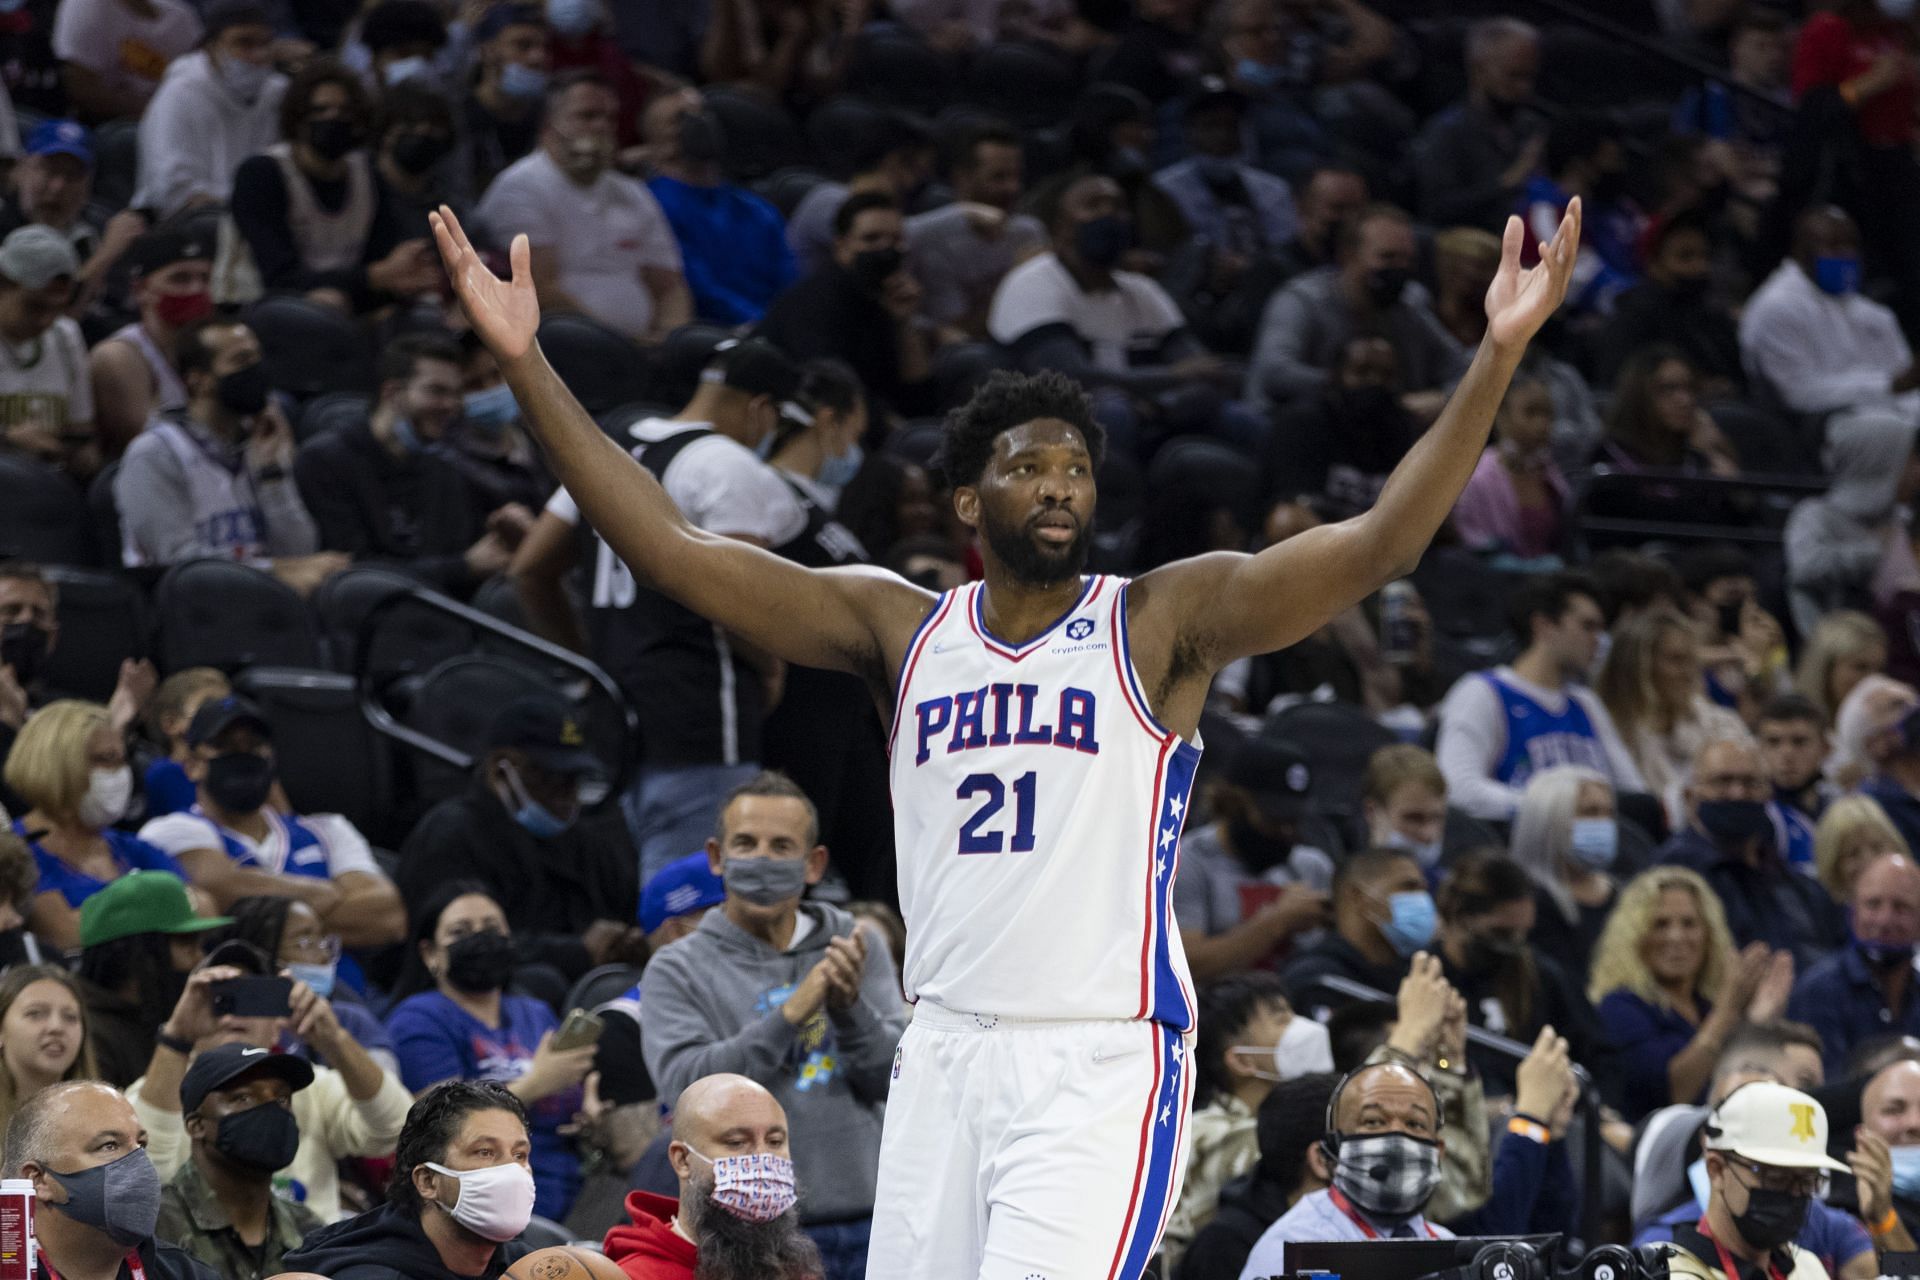 Joel Embiid #21 of the Philadelphia 76ers reacts against the Brooklyn Nets in the first half at the Wells Fargo Center on October 11, 2021 in Philadelphia, Pennsylvania.